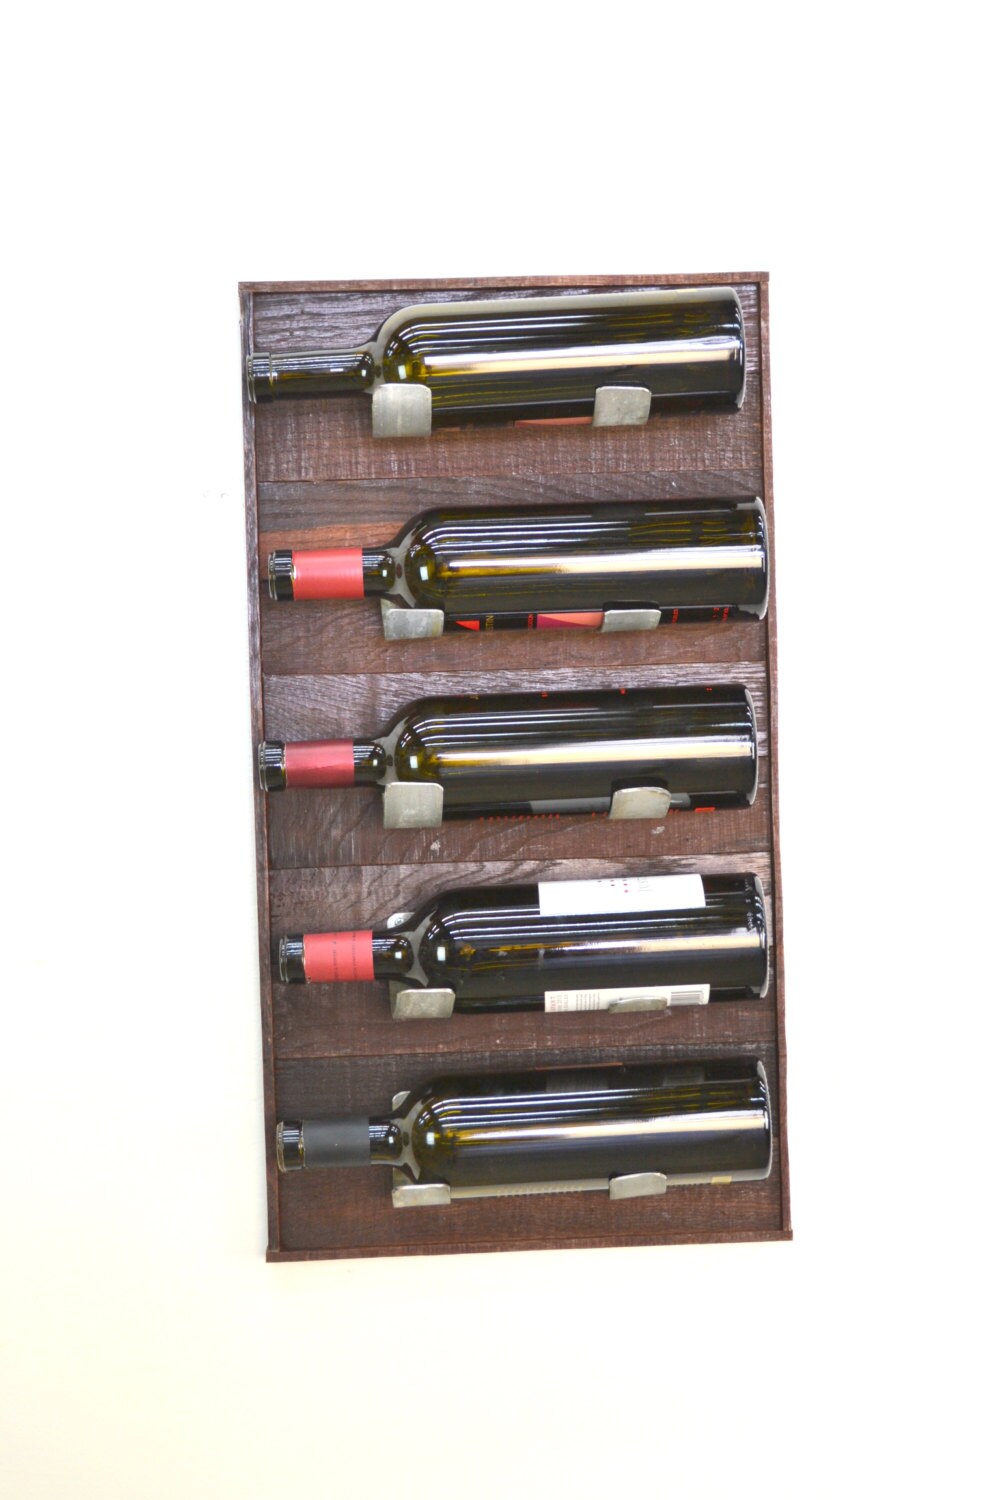 Wall Mounted Wall Wine Rack - Tapachi - Retired Napa wine barrels and rings 100% Recycled!